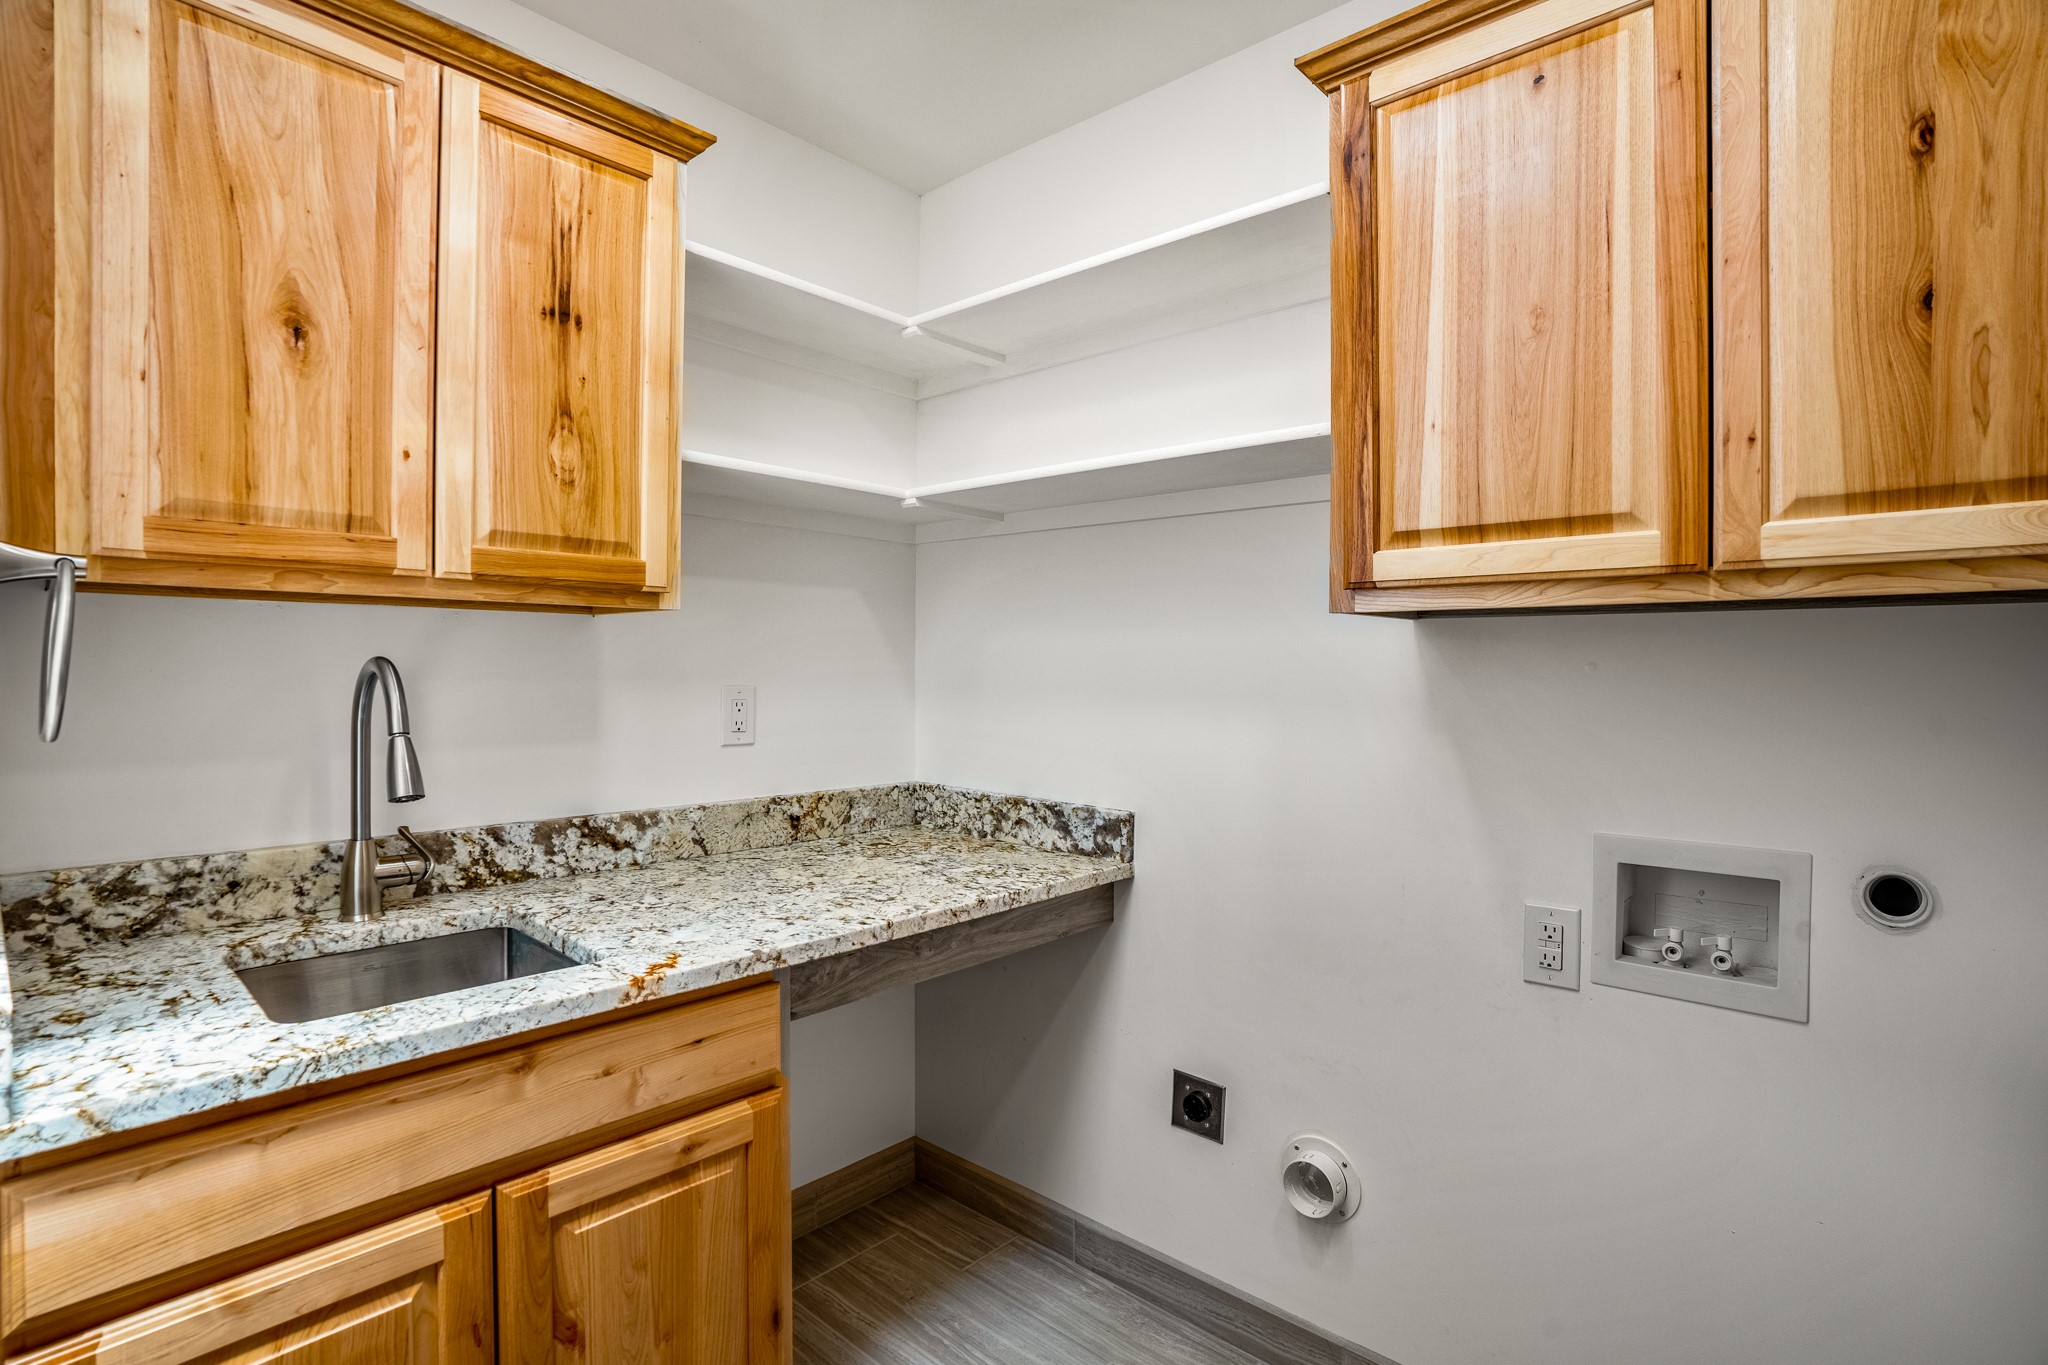 Laundry room with sink, plenty of counter space, cabinets and shelves.